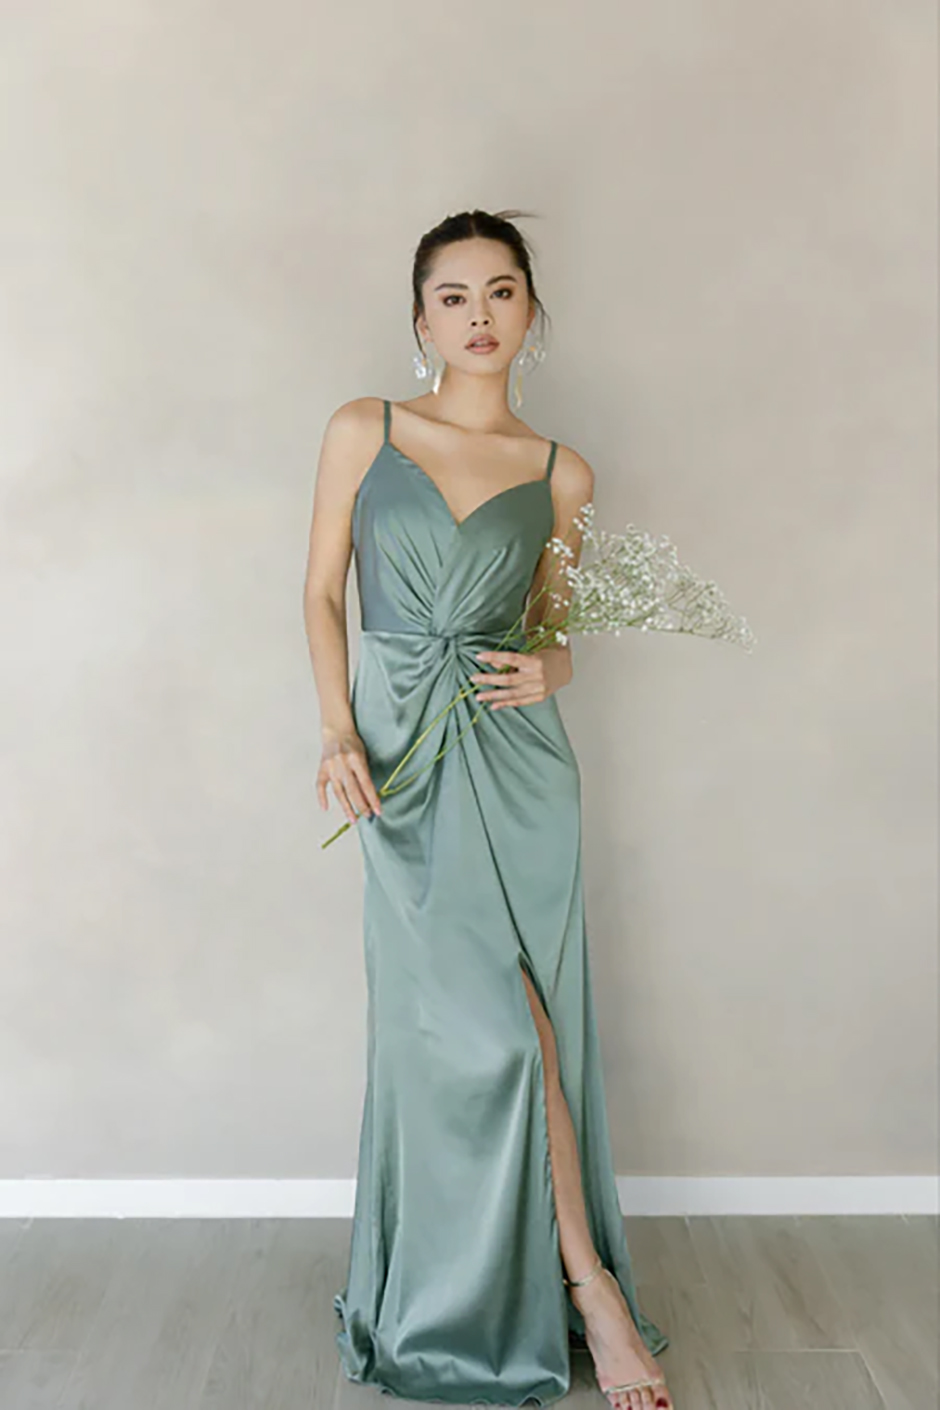 Spring bridesmaid dress from TH&TH - sage green satin maxi dress with twisted front design and leg split